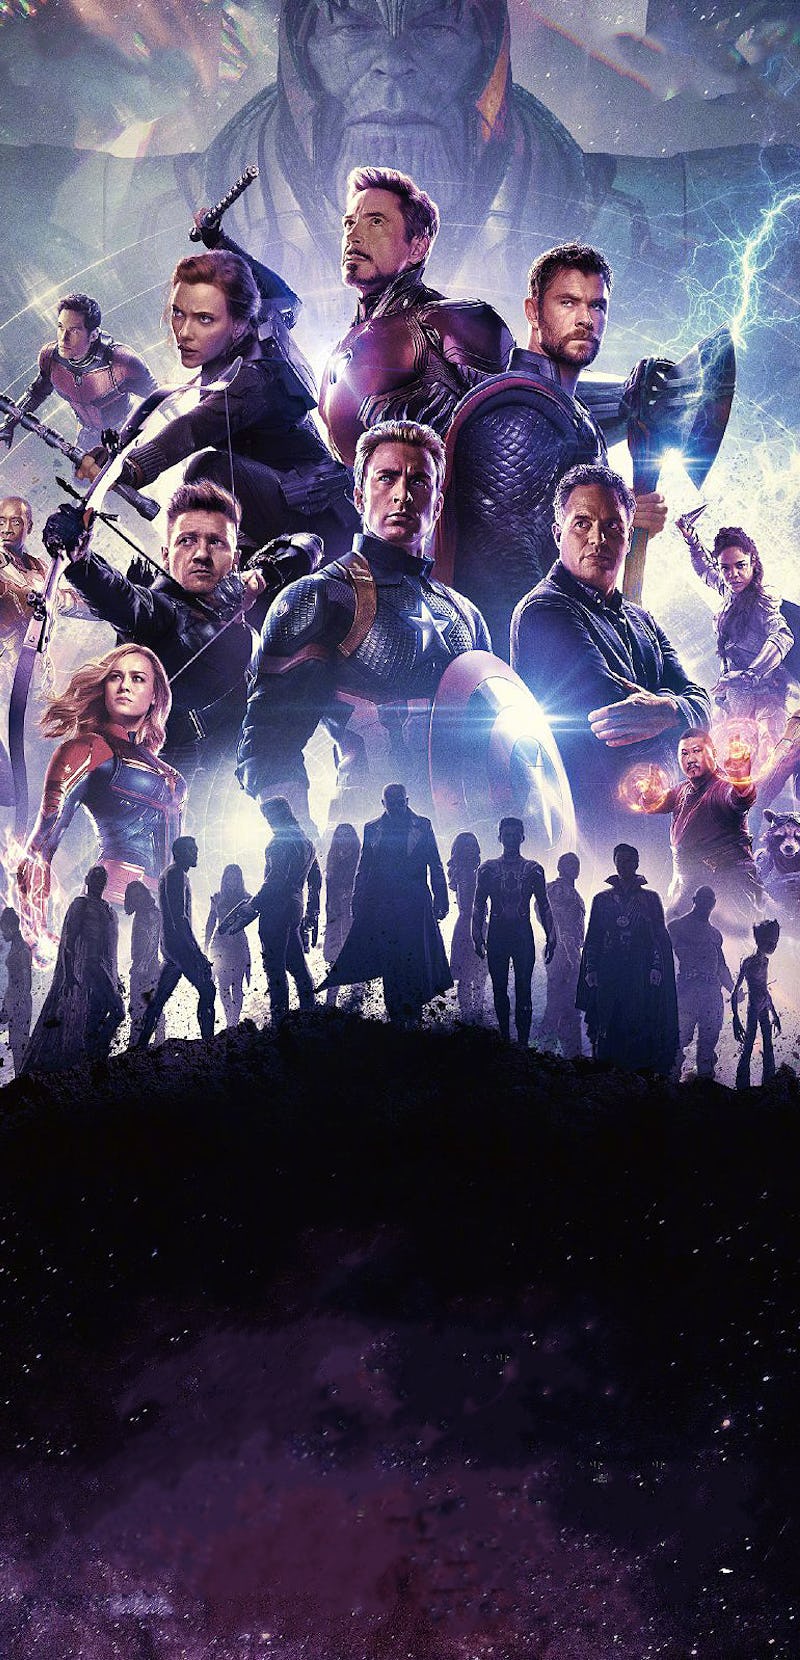 Avengers: Endgame wallpaper with all characters